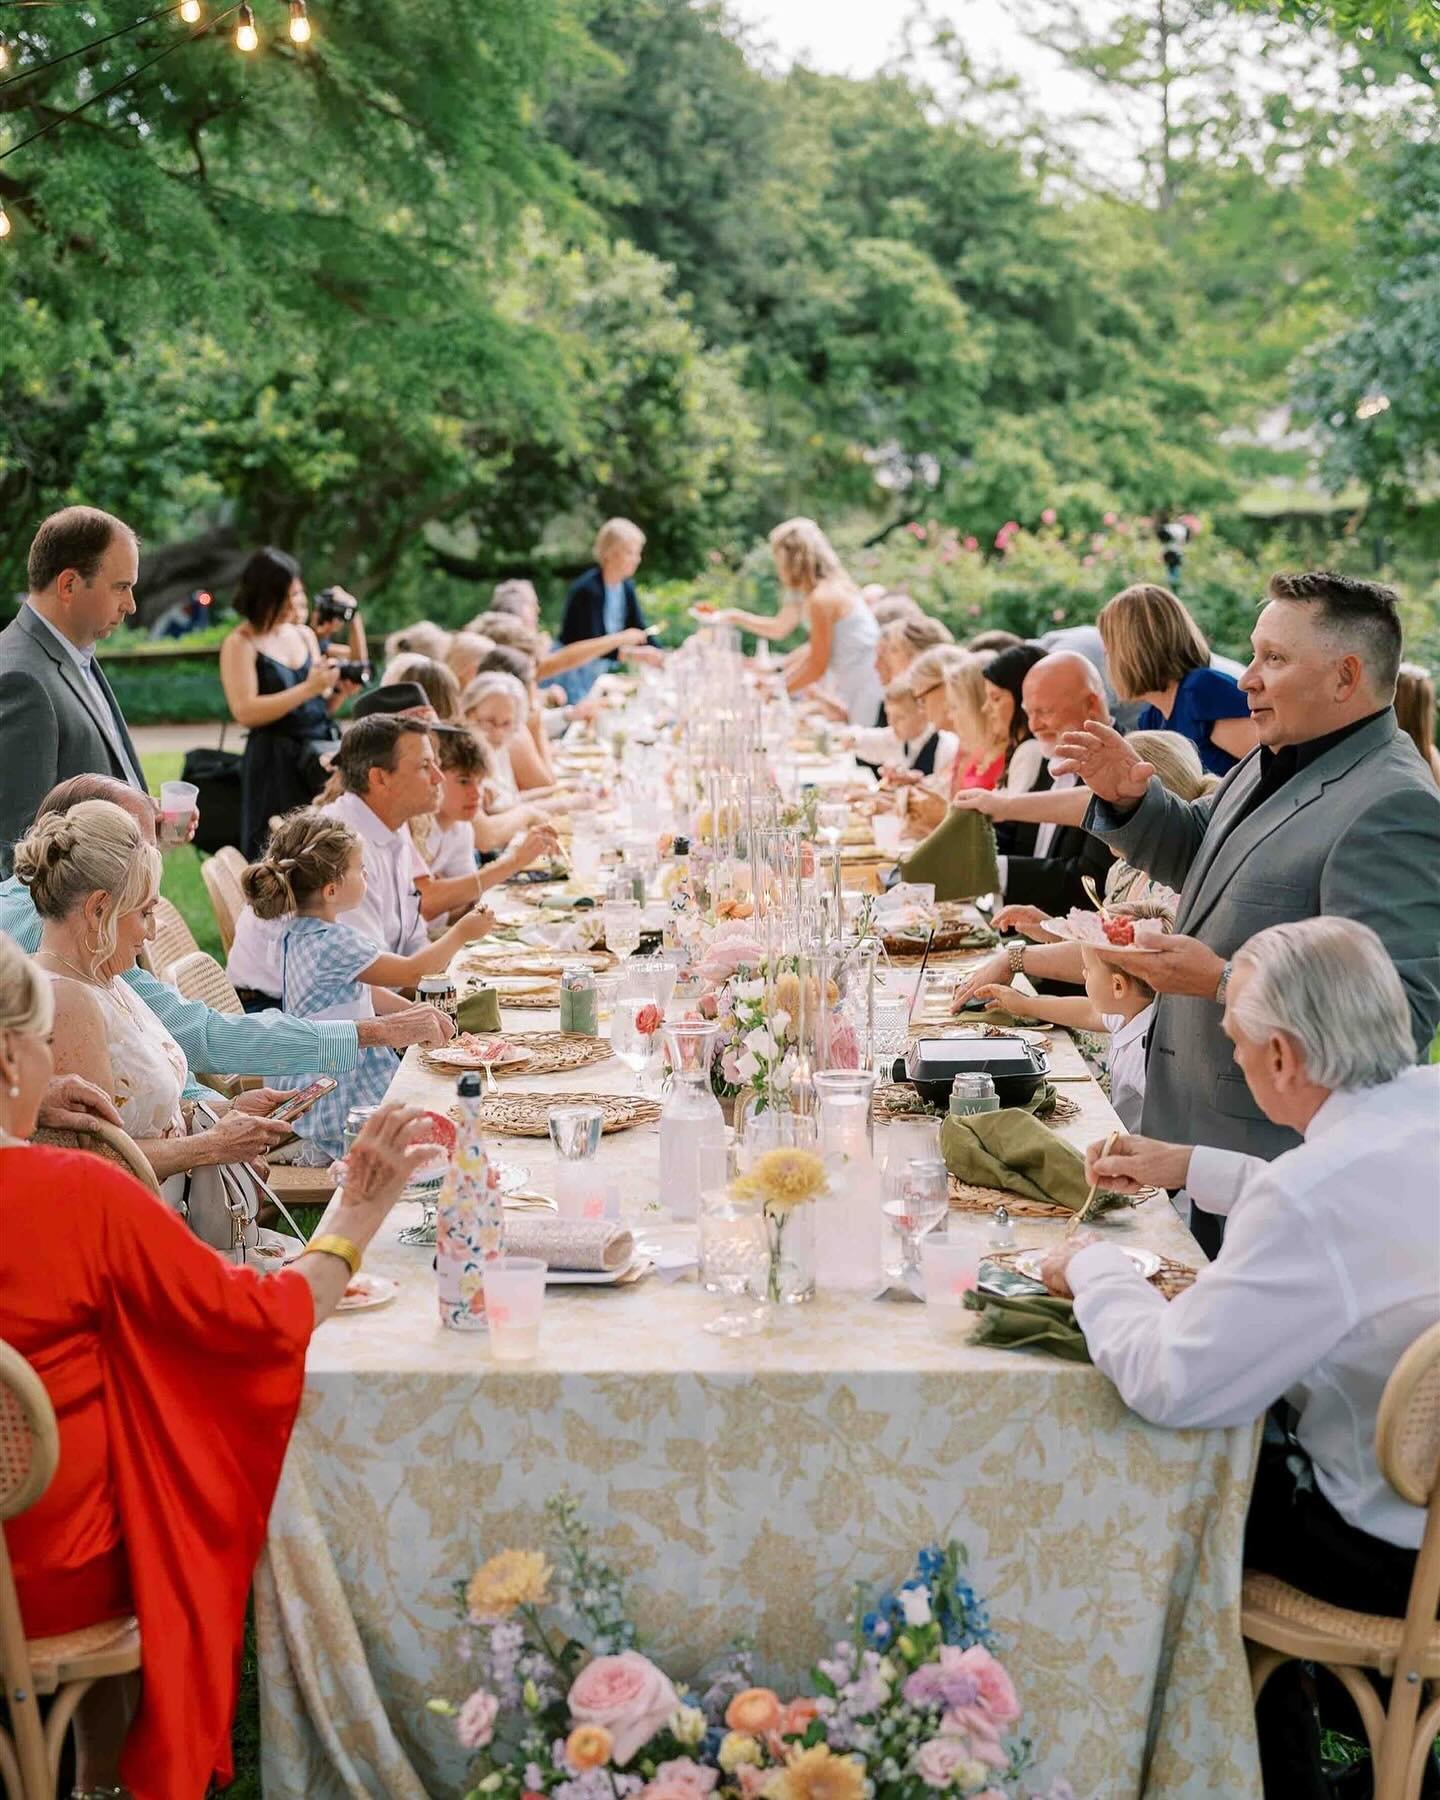 Immaculate al fresco wedding dinner party vibes 🤌🏻

It&rsquo;s giving Bridgerton.  It&rsquo;s giving Midsummer. It&rsquo;s giving Perfection. 

Planning + Design @harpercollectivedesign&nbsp;
Venue @earleharrisonhouse&nbsp;
Photo @jessicaschumakerp